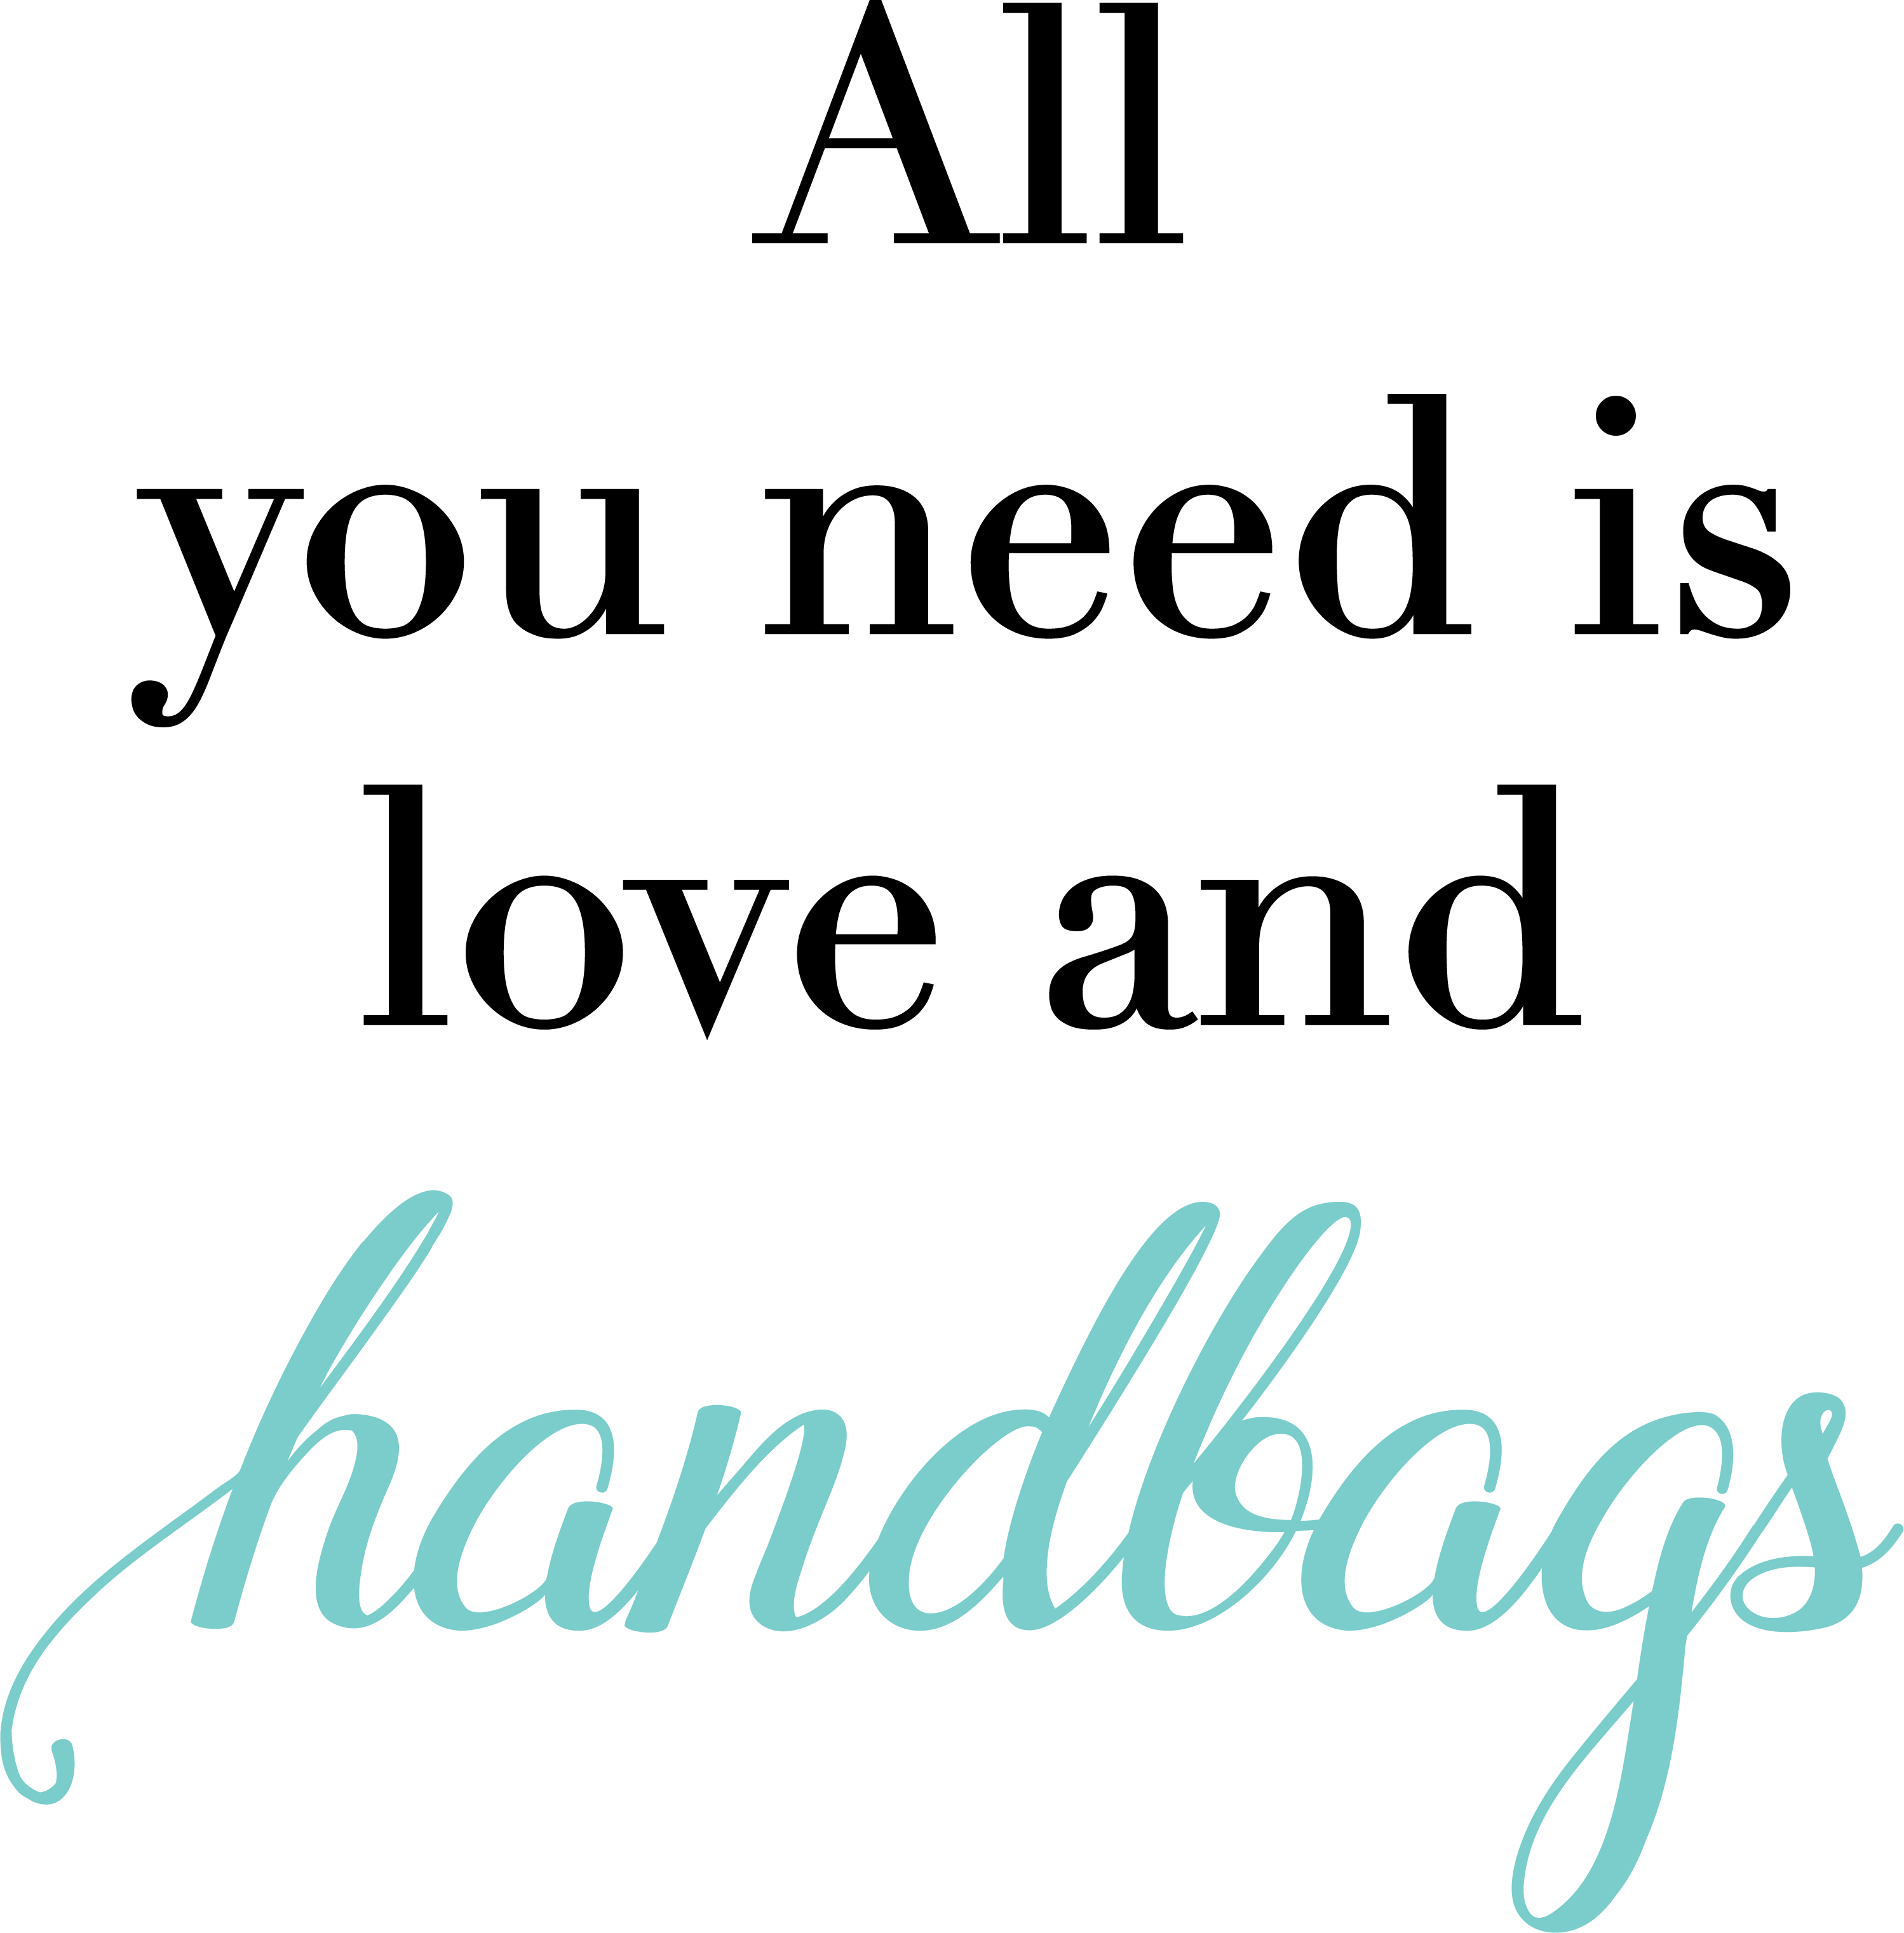 All You Need Is Love and Handbags SVG Cut File